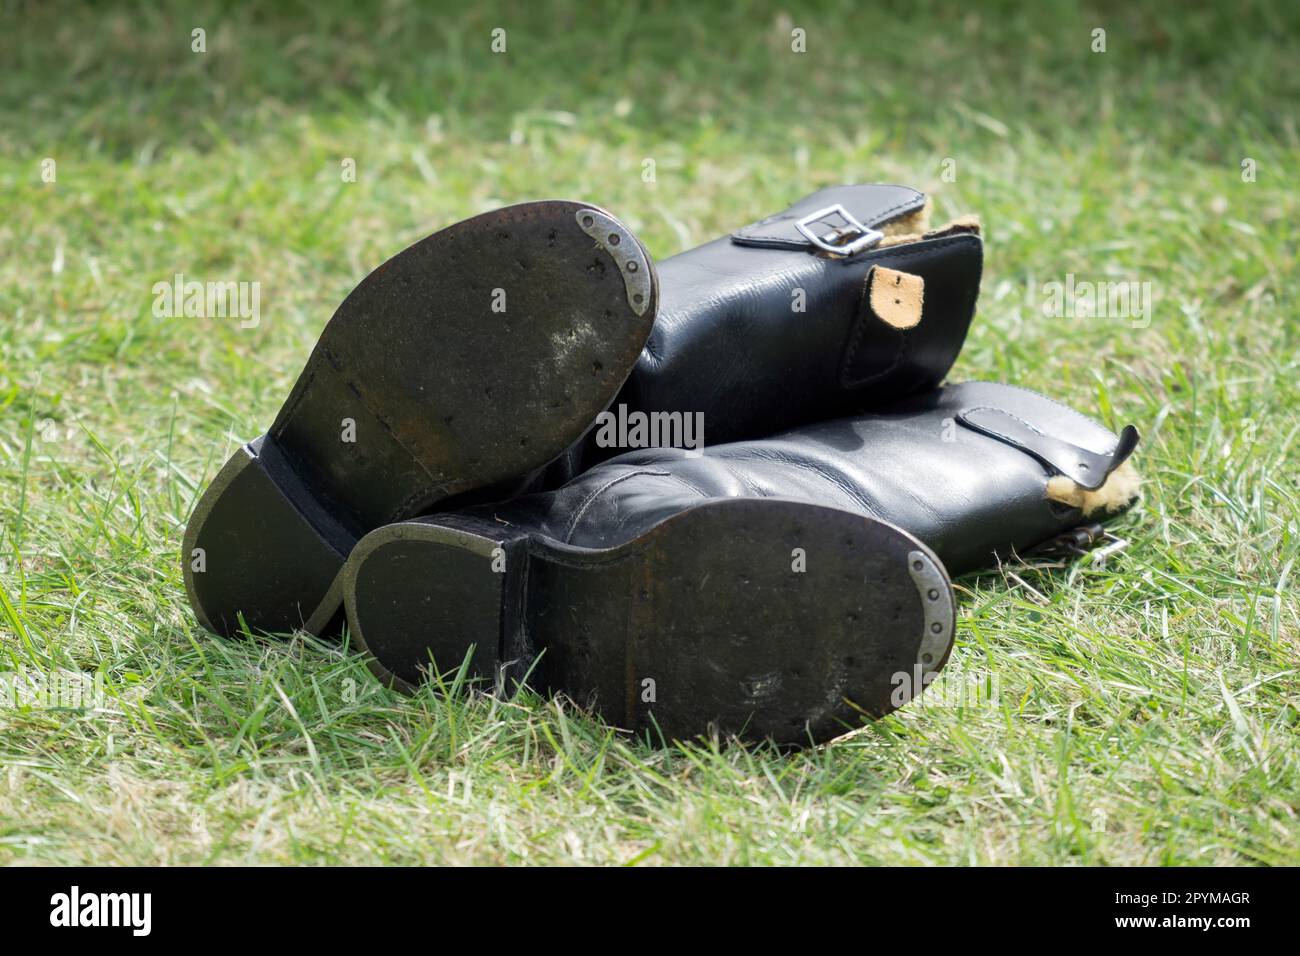 Old WW2 boots on display at Shoreham Airfield Stock Photo